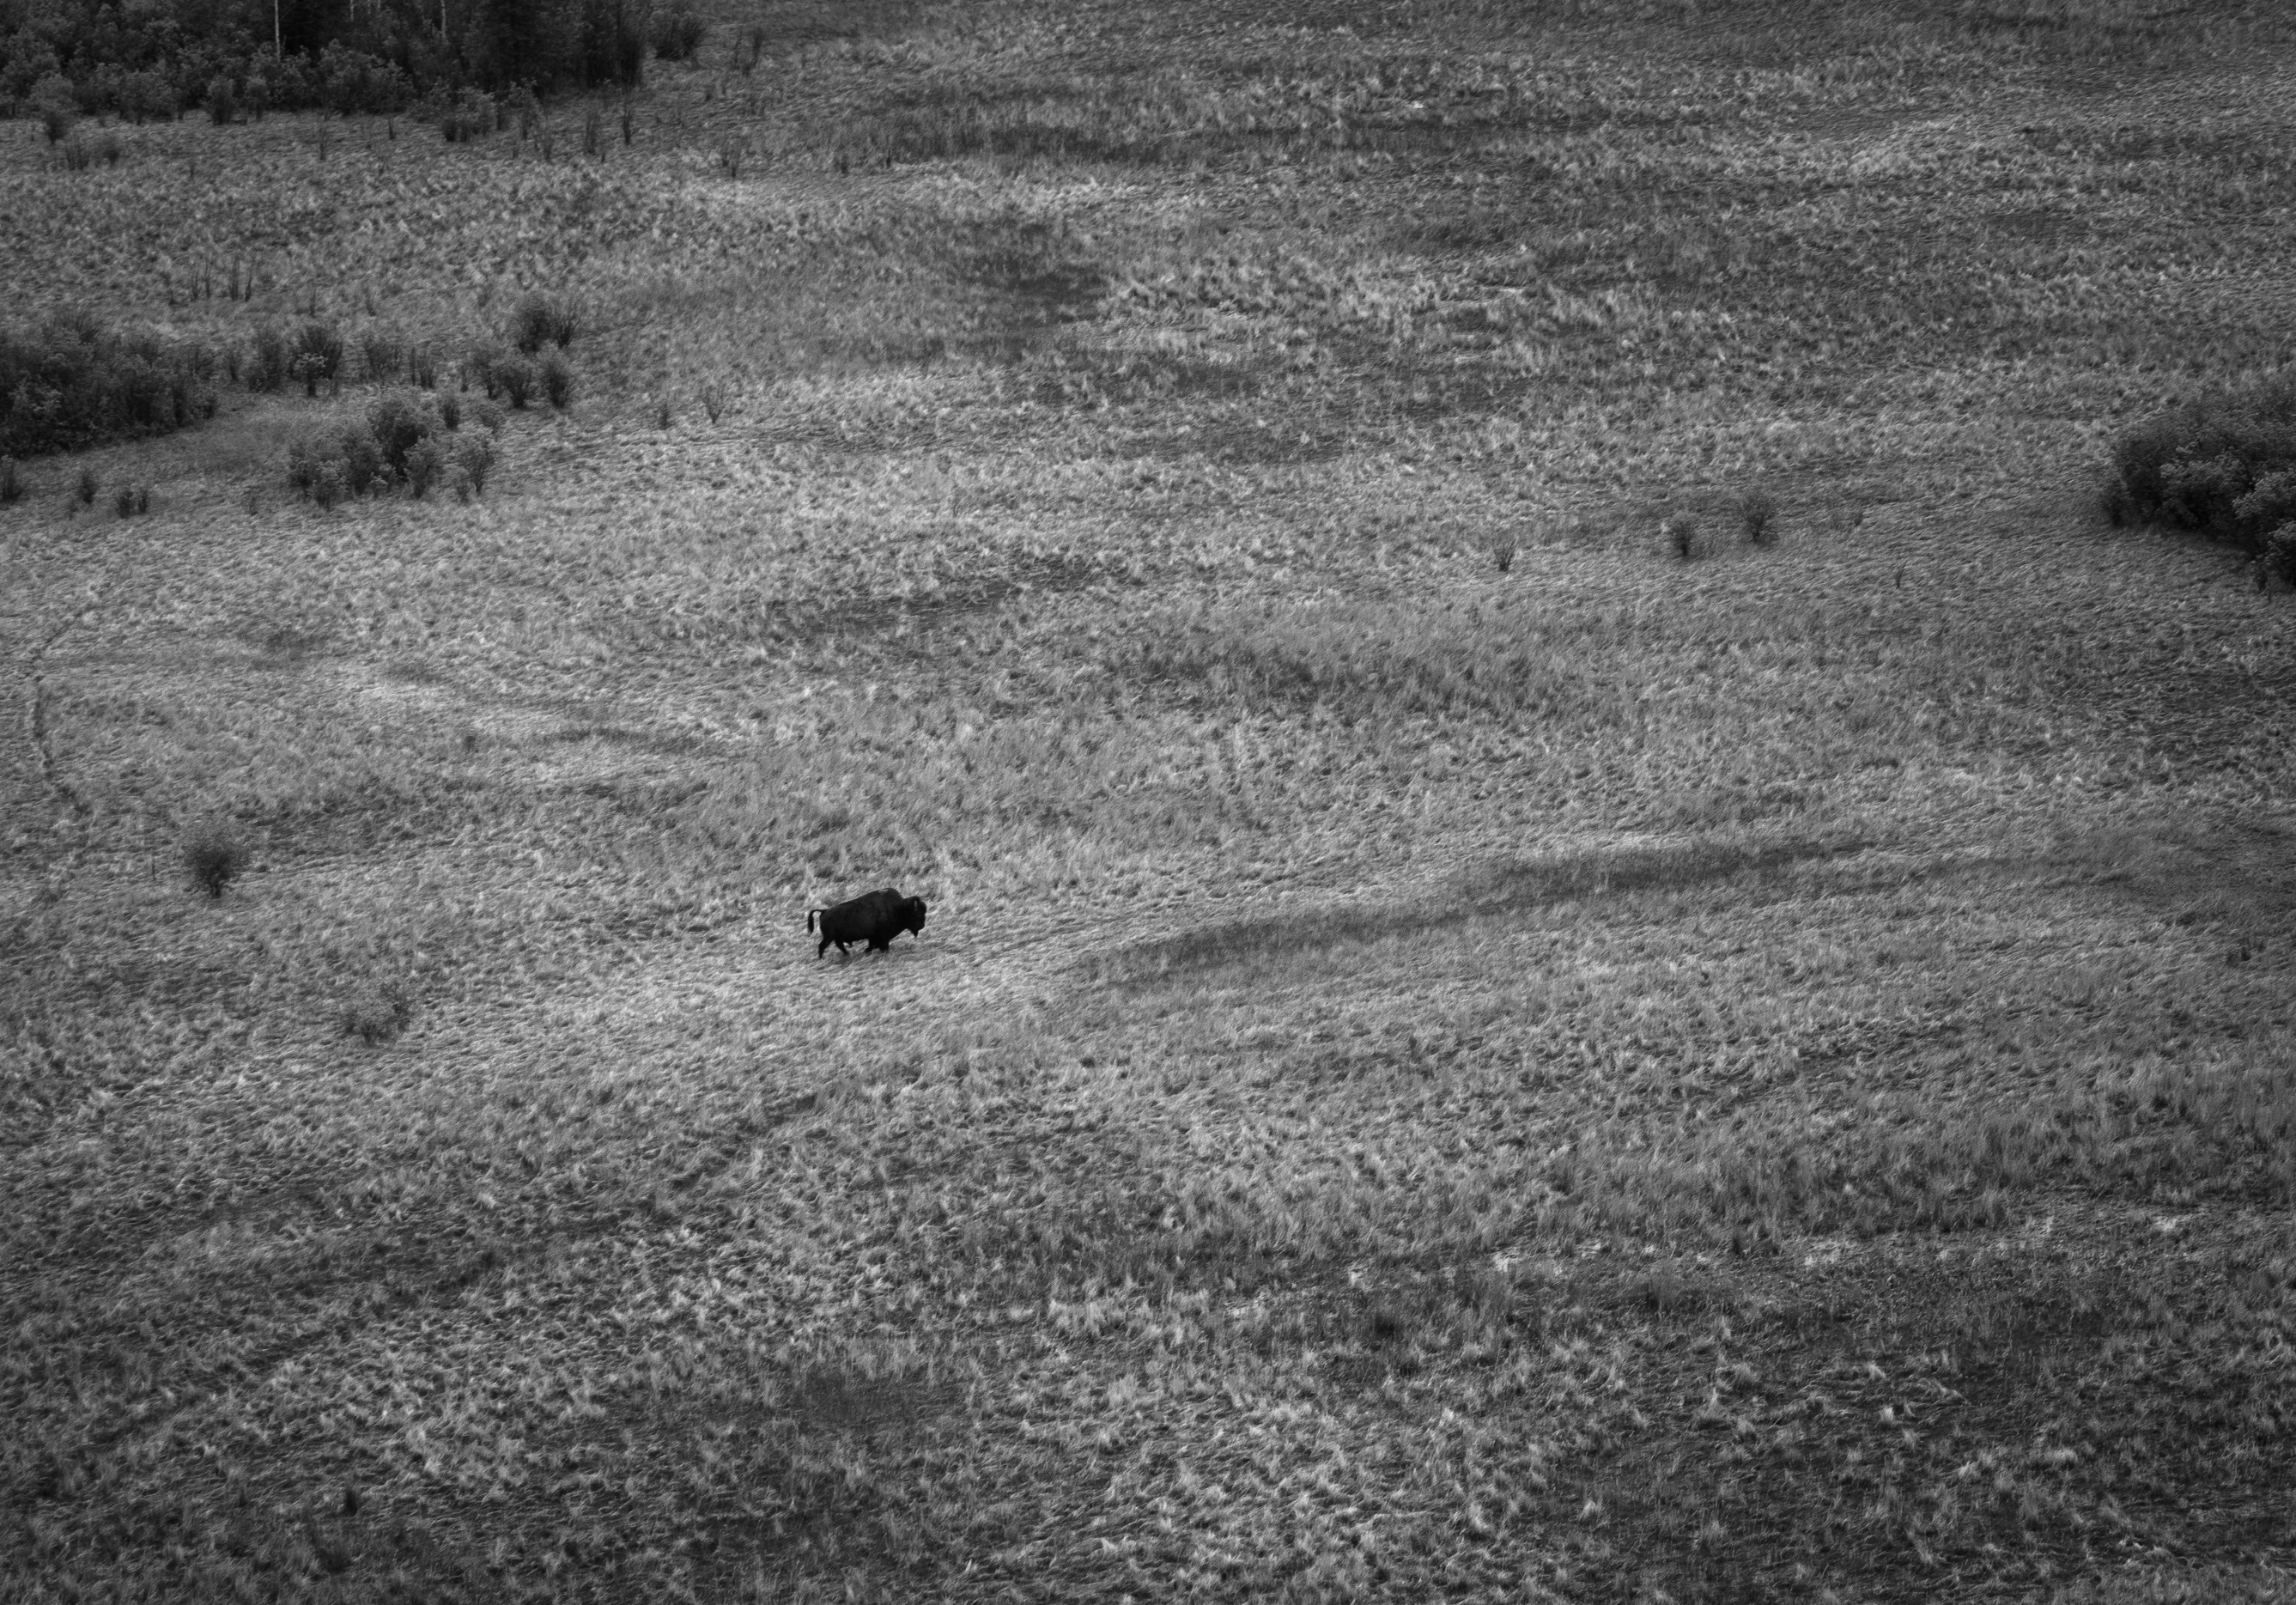 Lone bull bison crossing a field in Wood Buffalo National Park.